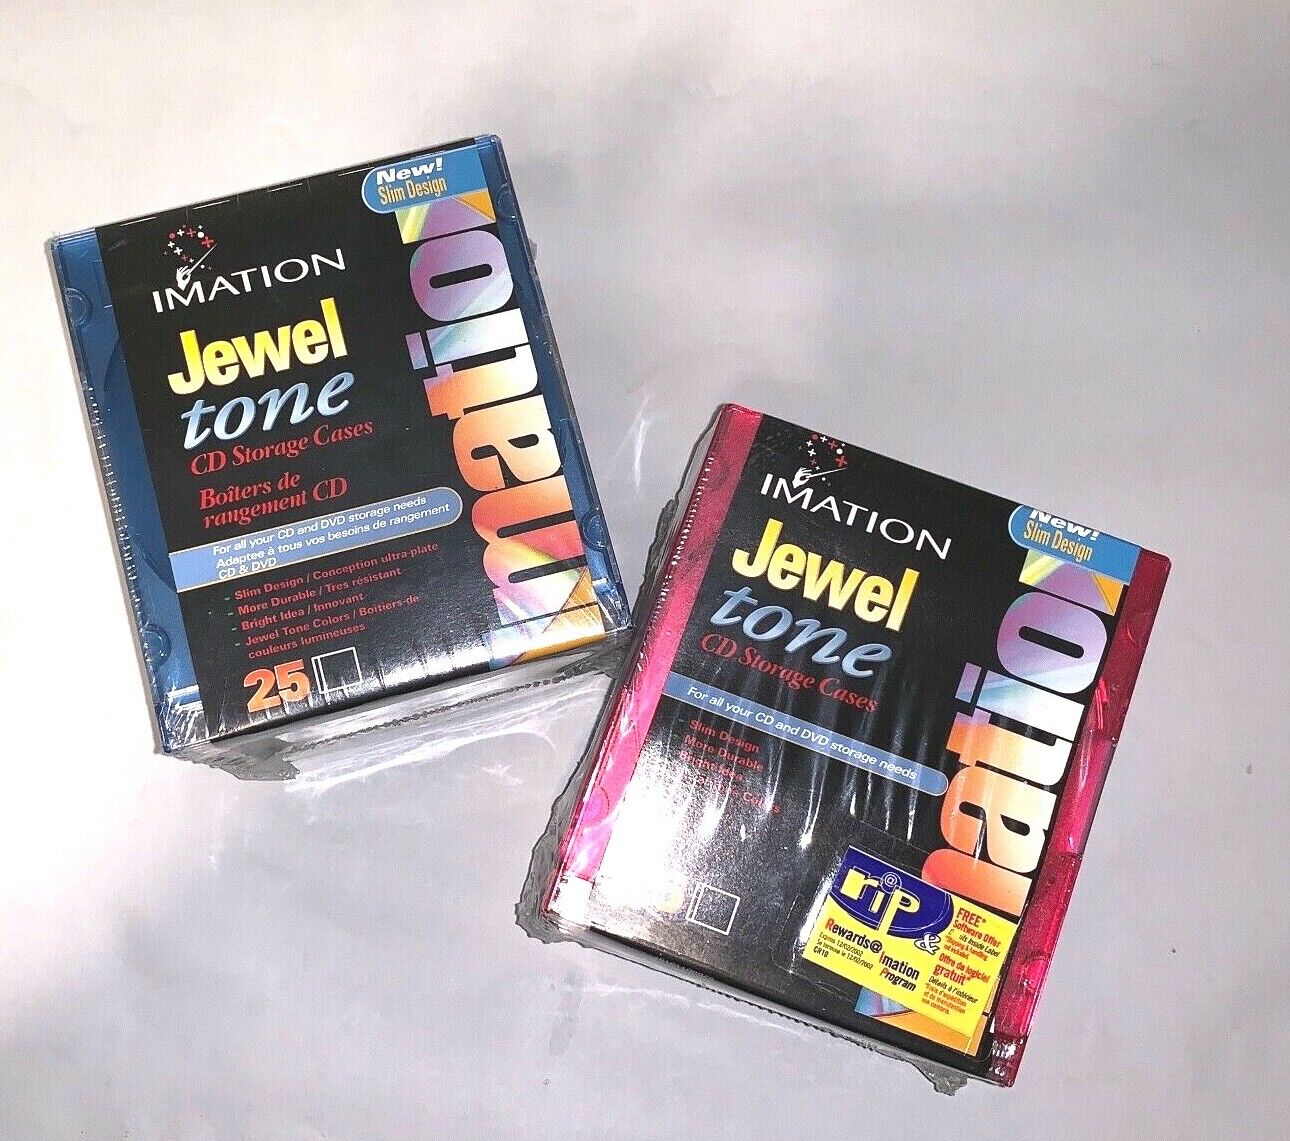 Imation CD DVD Pack (Two 25 Packs) of Colored Tone Jewel Cases for CDs DVDs